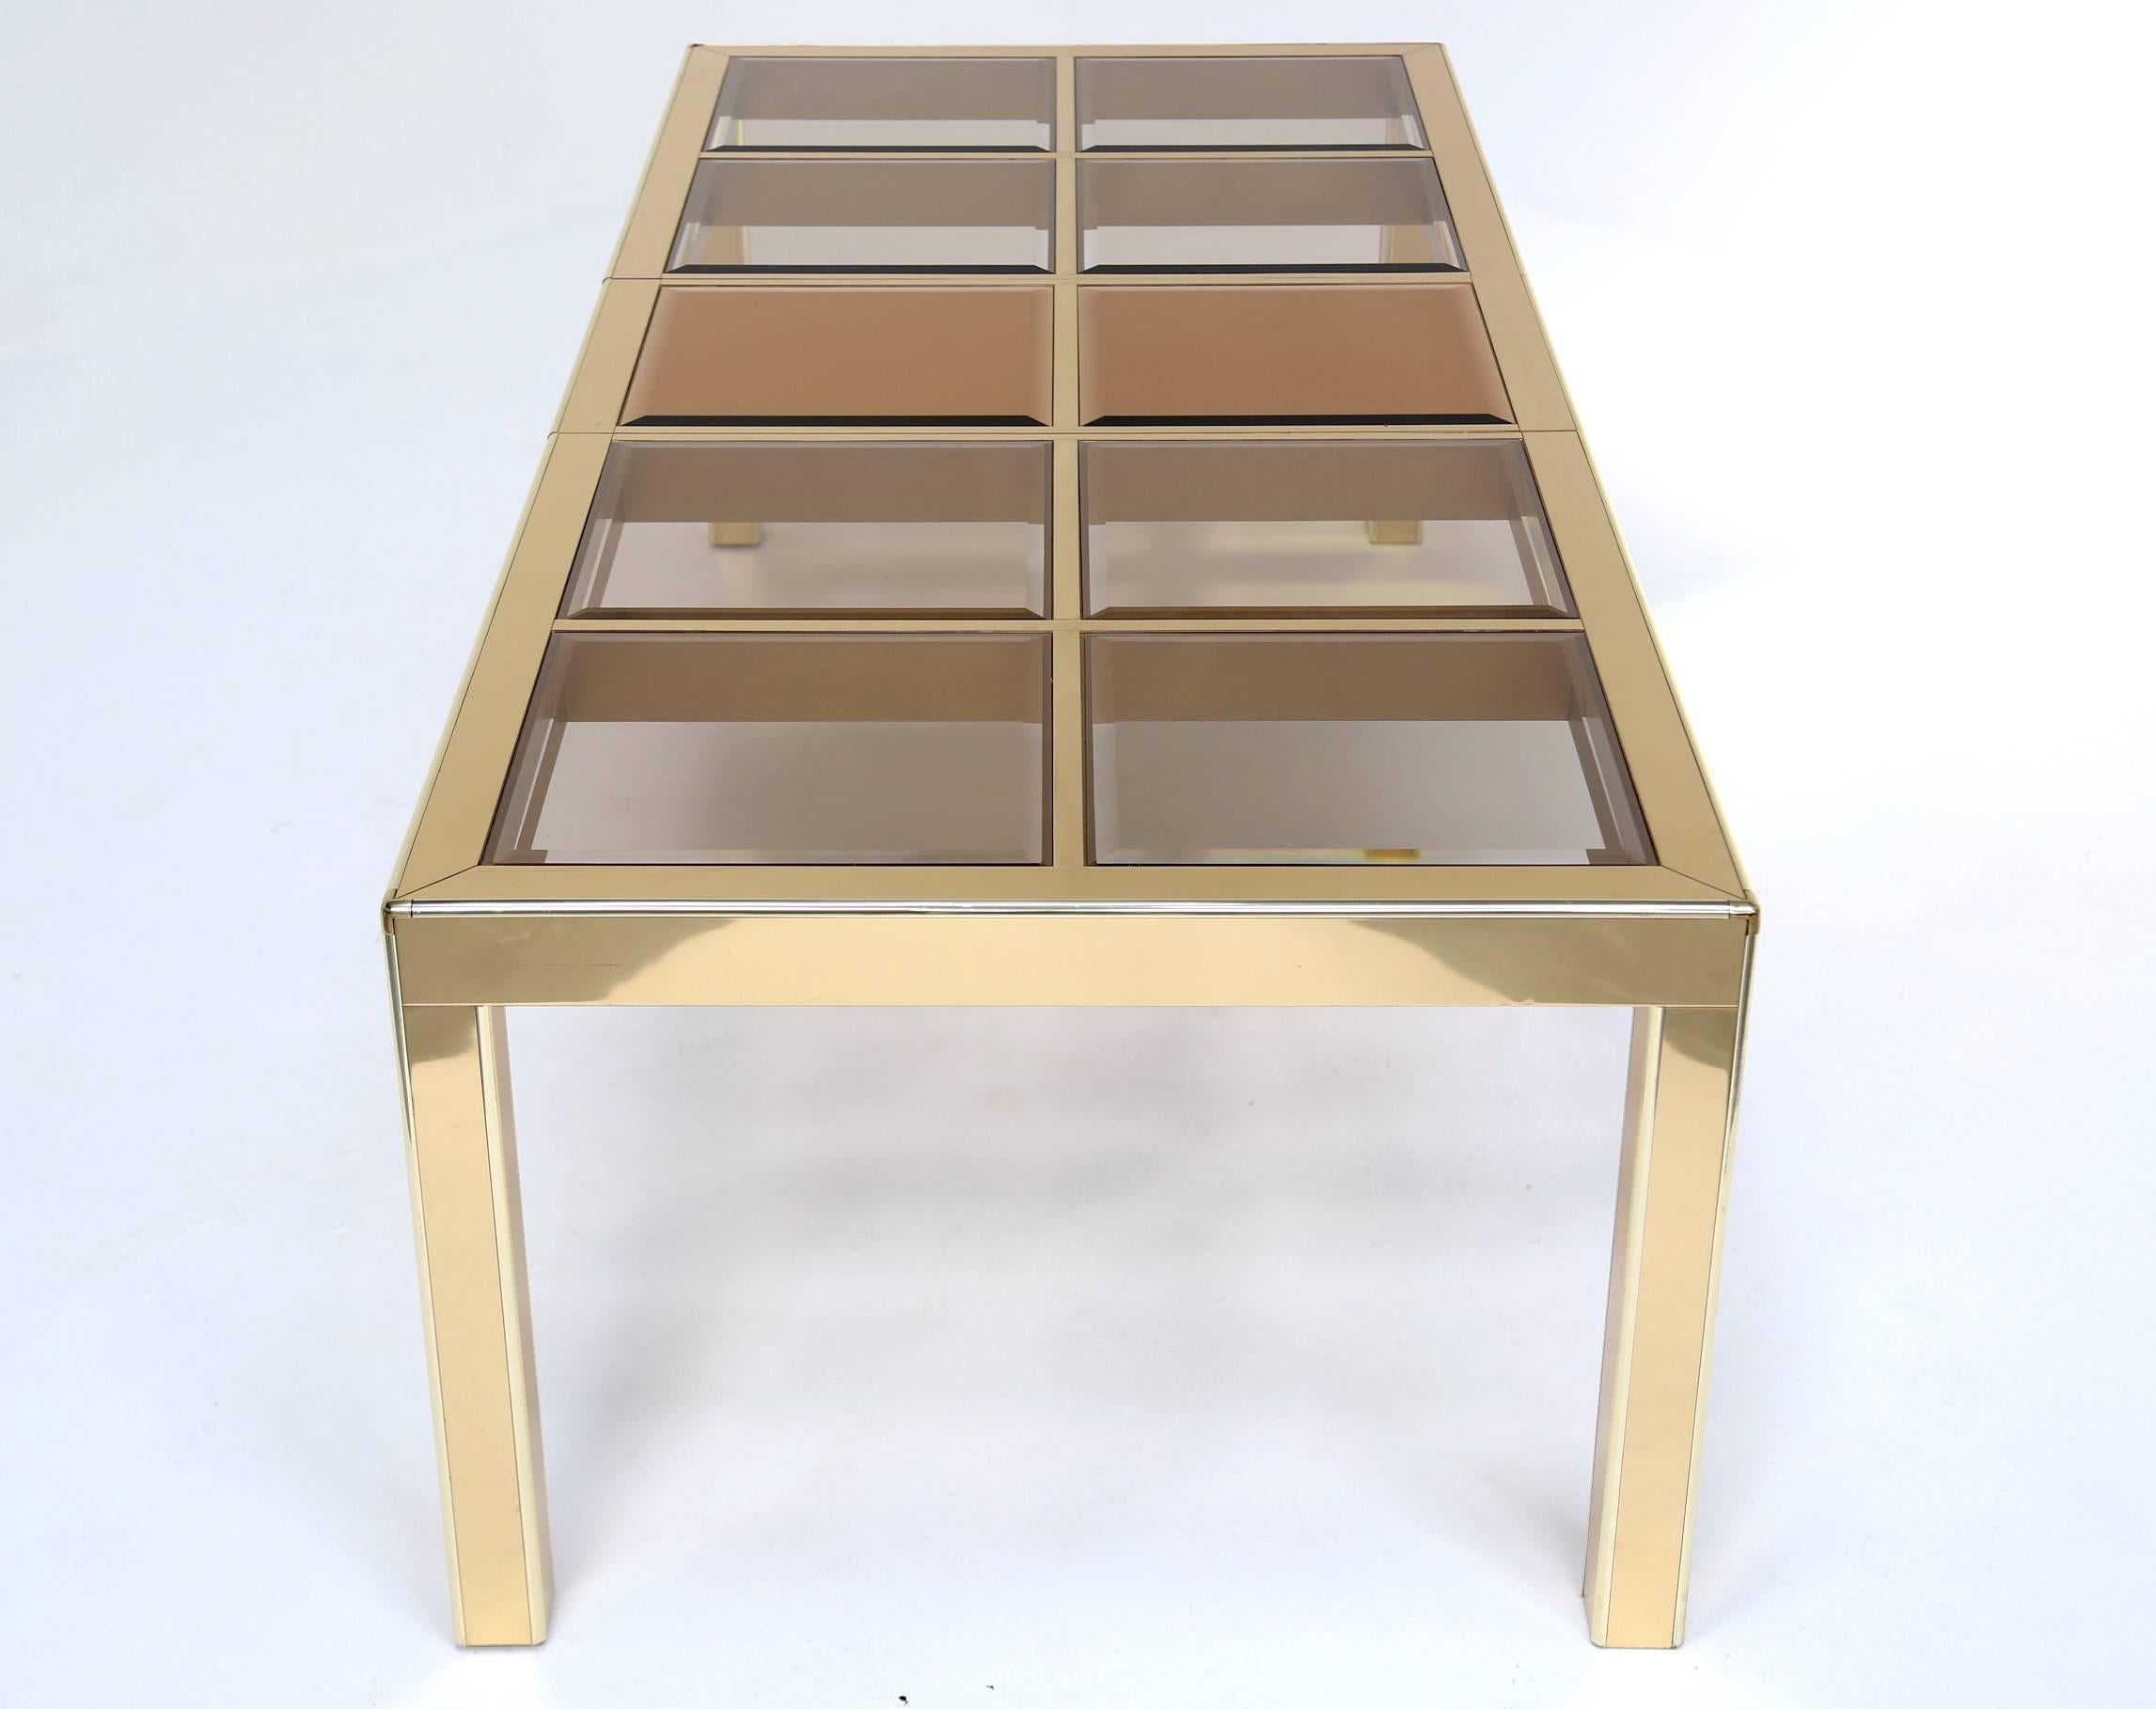 A superb quality brass extending dining table by Mastercraft, made in the 1970s using a plated brass table with a mix of smoked and mirrored glass panels. Its a very solid table and a generous size, perfect for entertaining large groups. Looks great